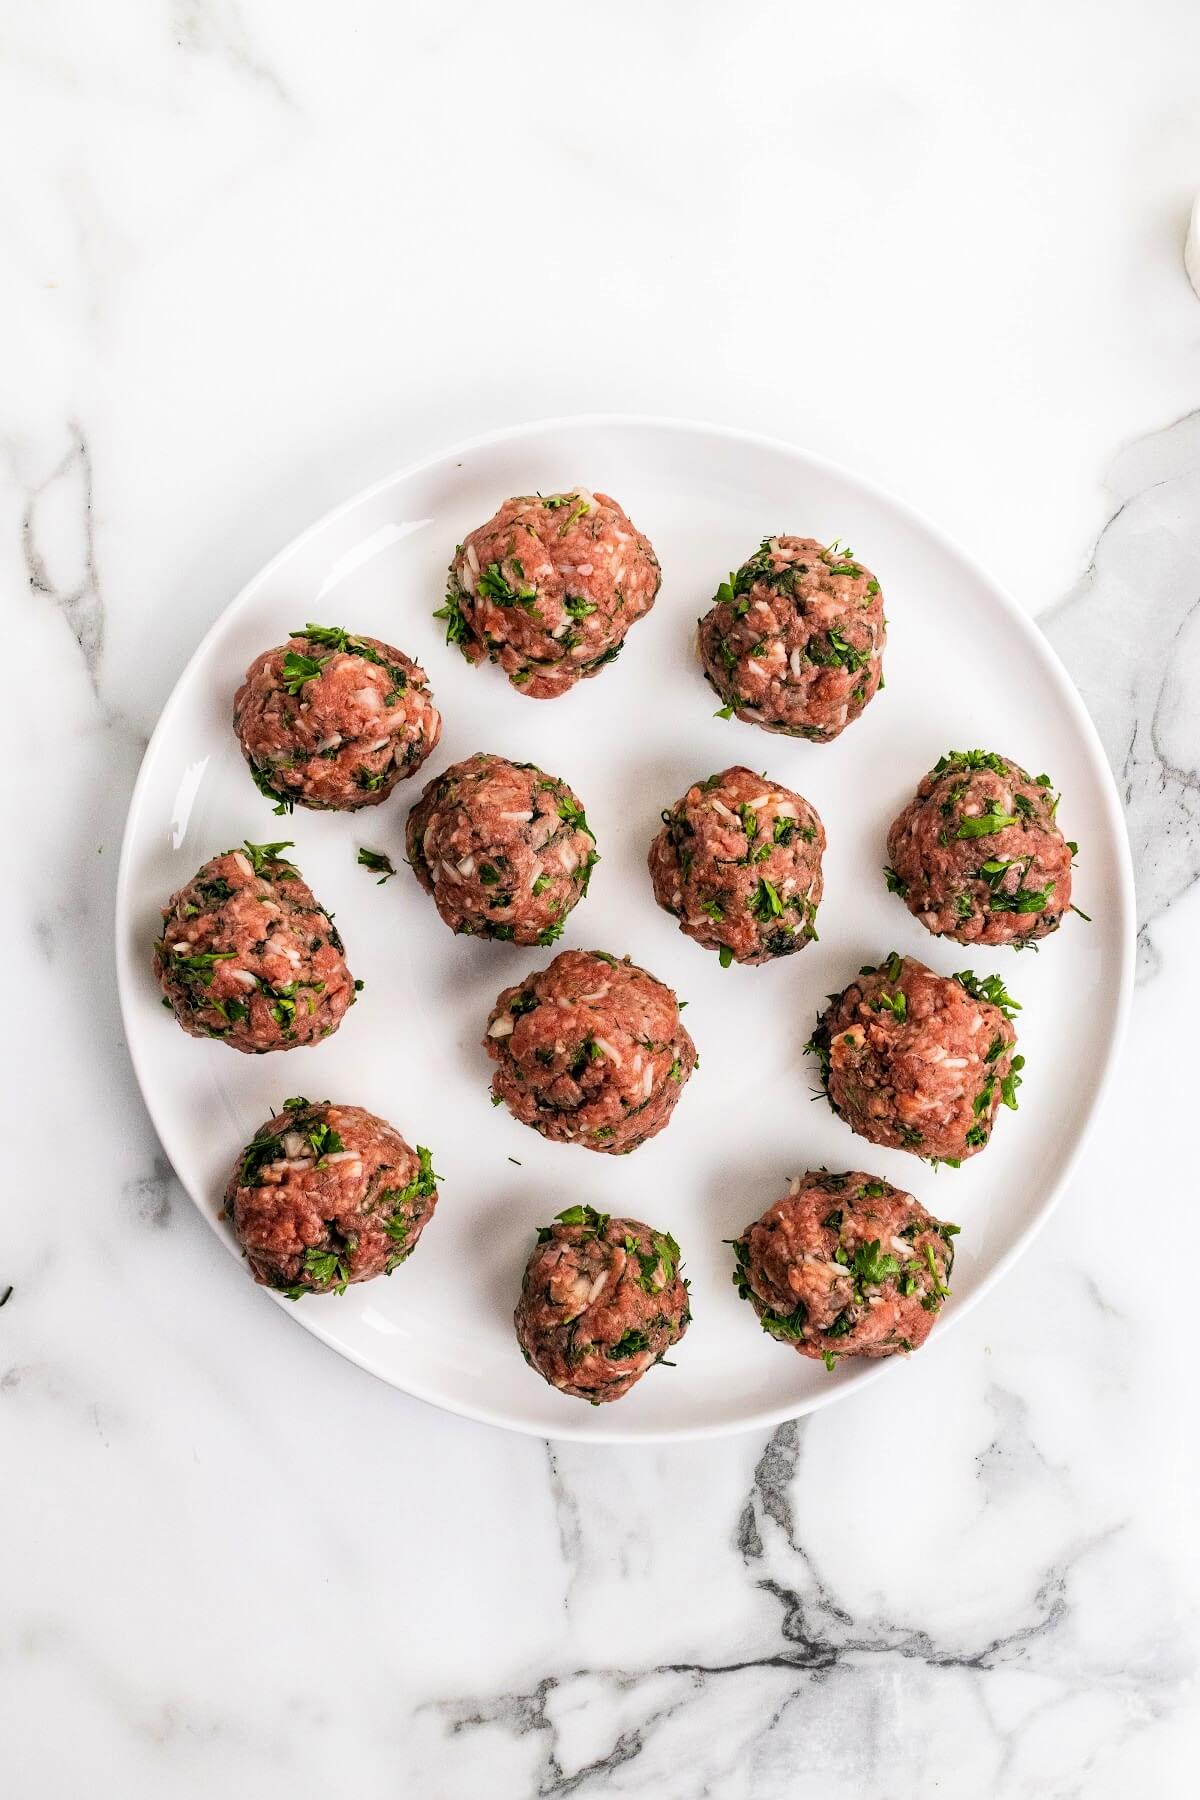 Plate with 12 raw herb-filled meatballs.